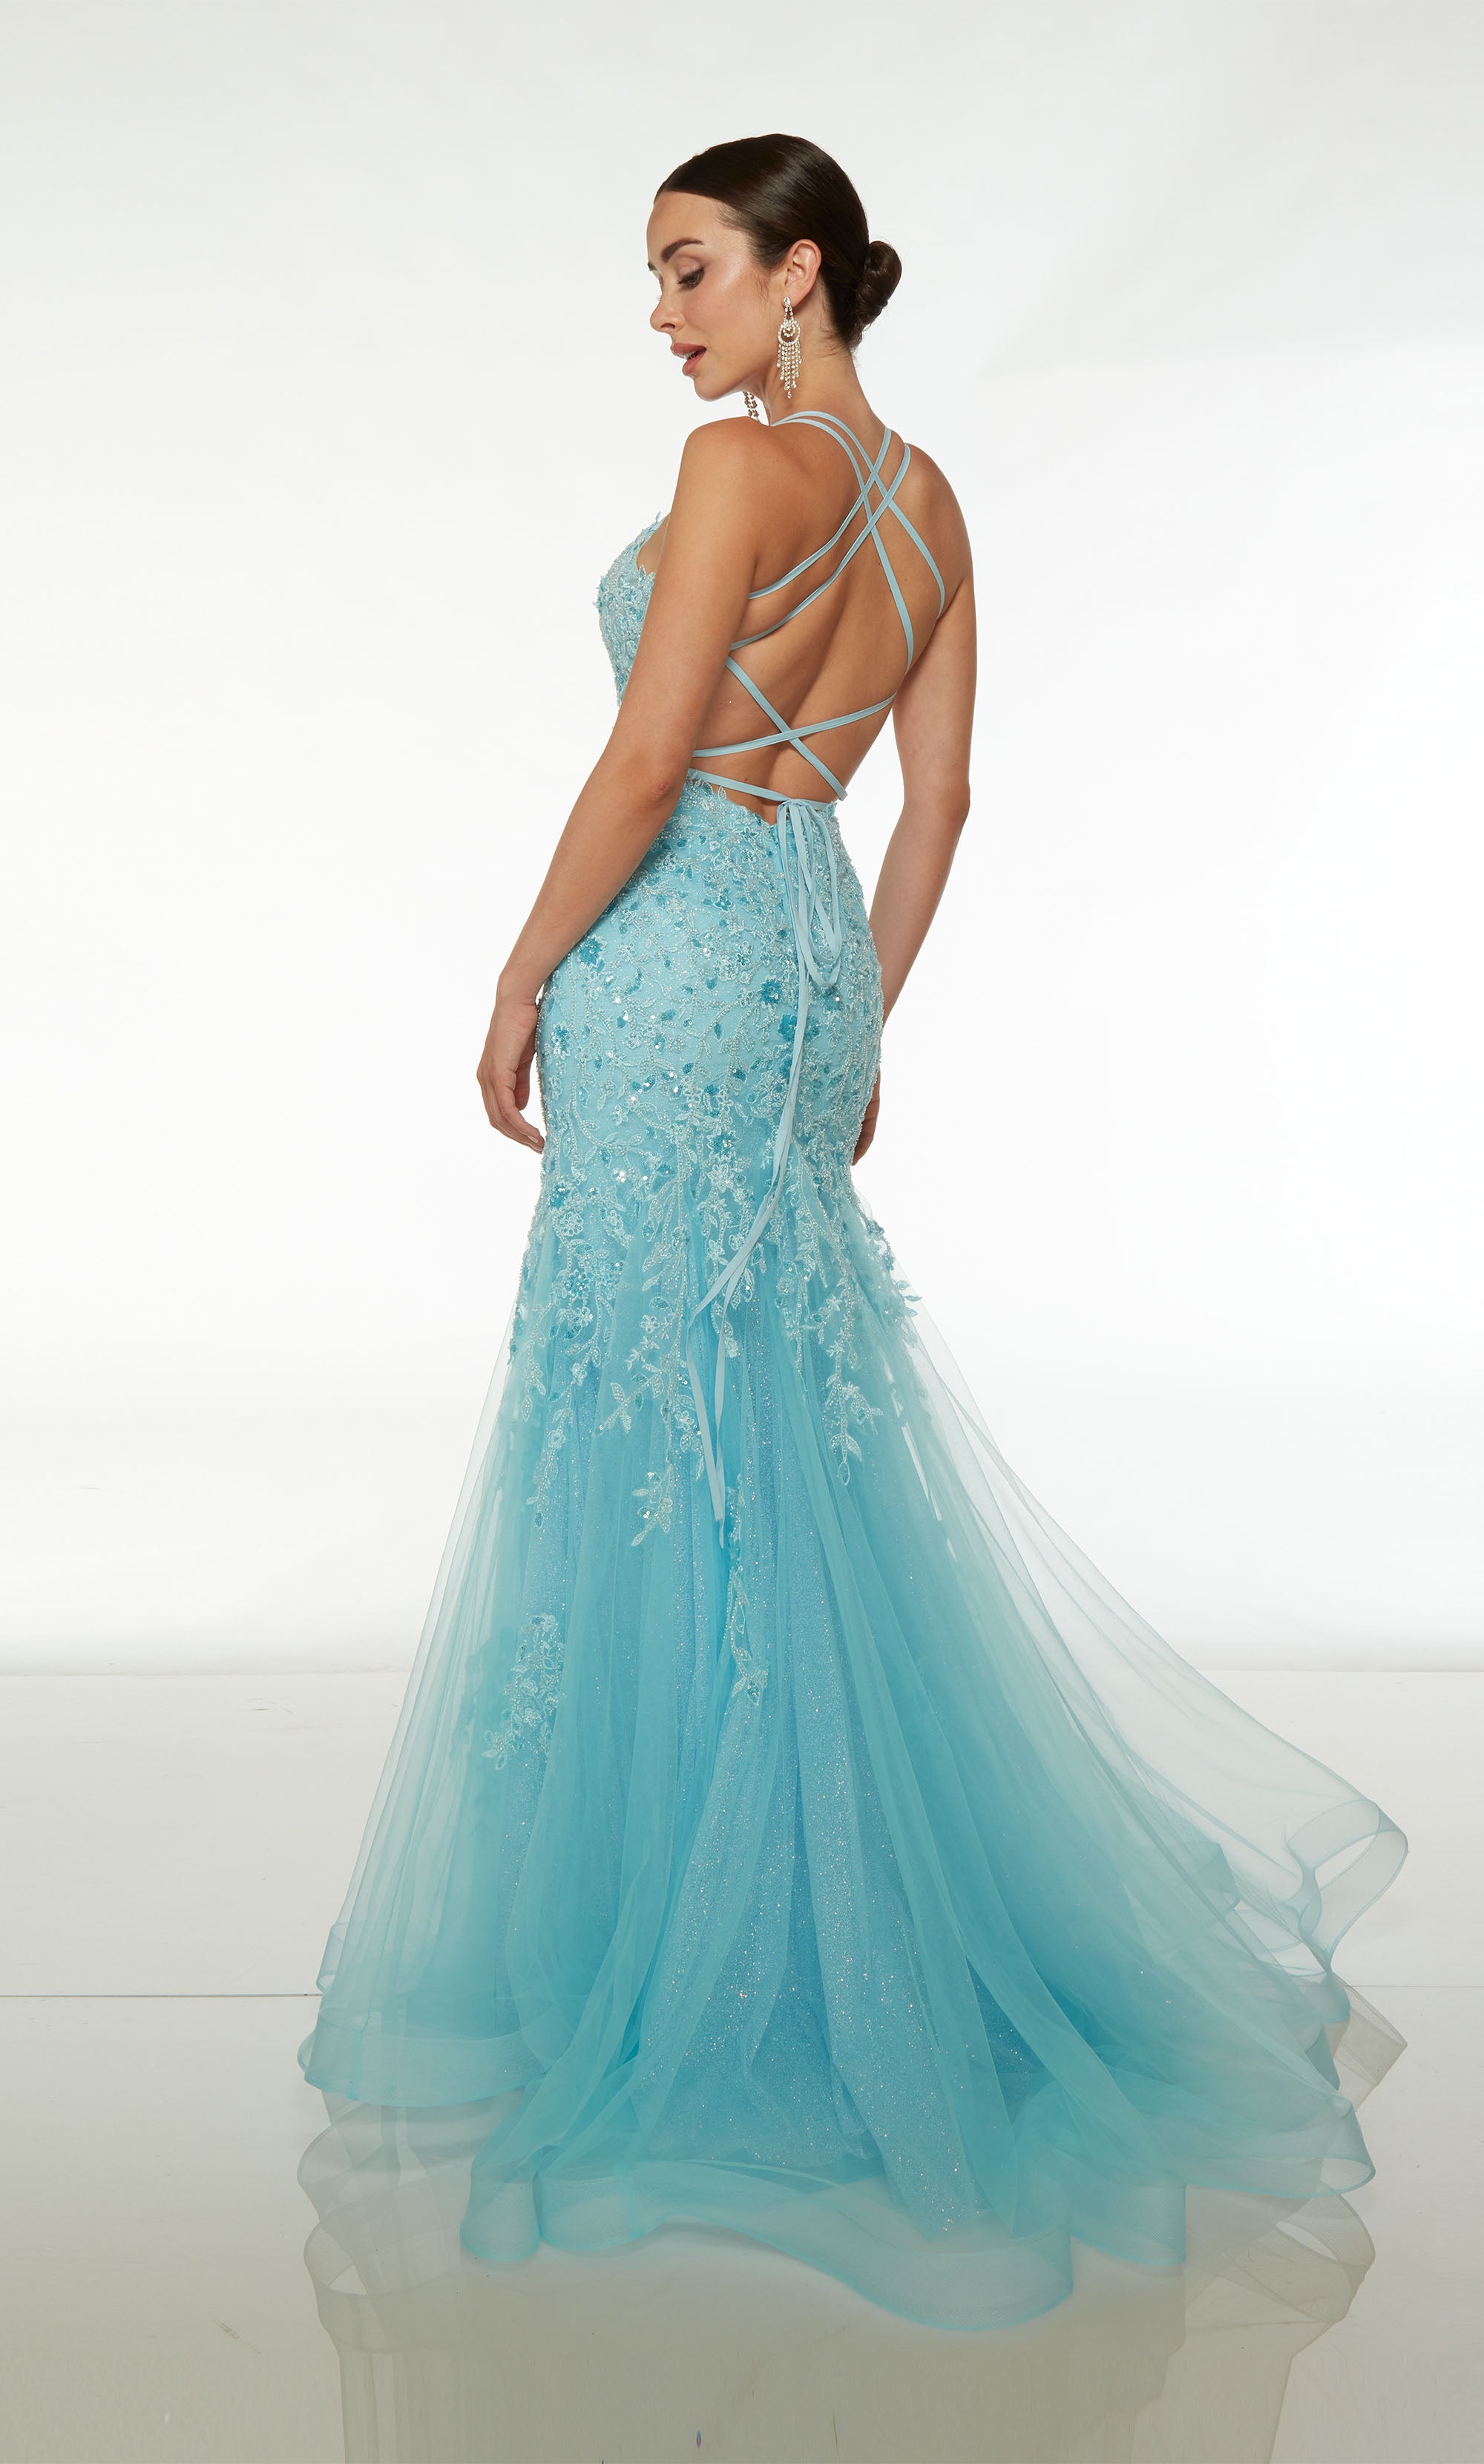 Charming baby blue mermaid gown: intricate beaded floral lace appliques, sheer corset bodice, dual straps, lace-up back, and layered train for an captivating look.